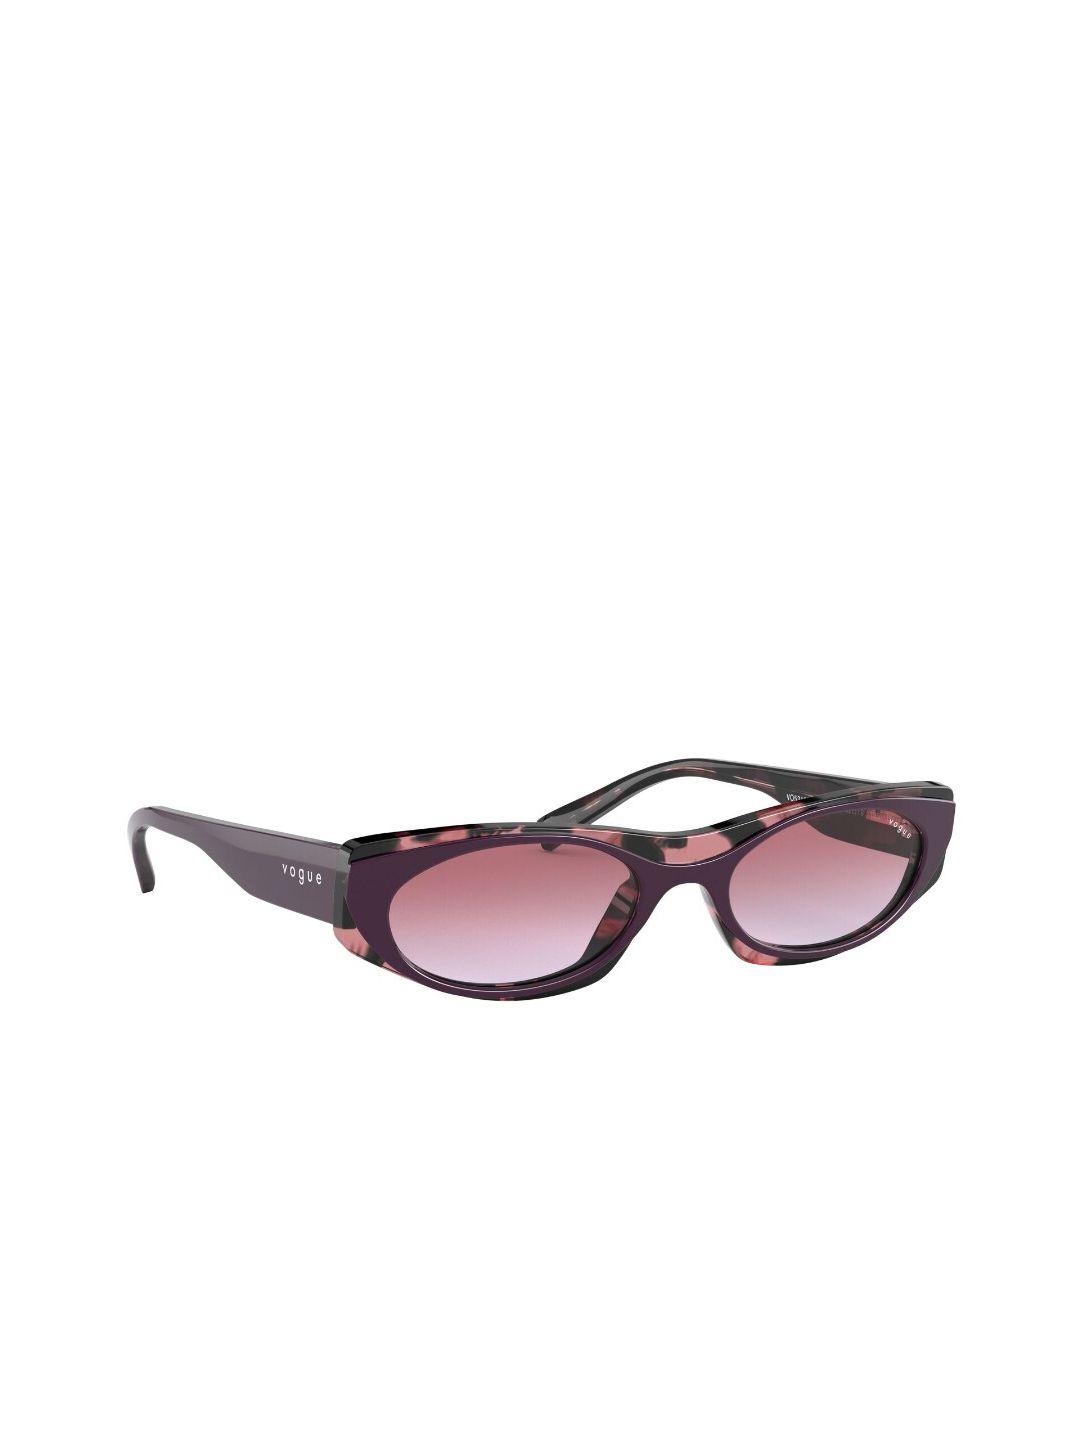 vogue women lens & other sunglasses with uv protected lens 8056597210188